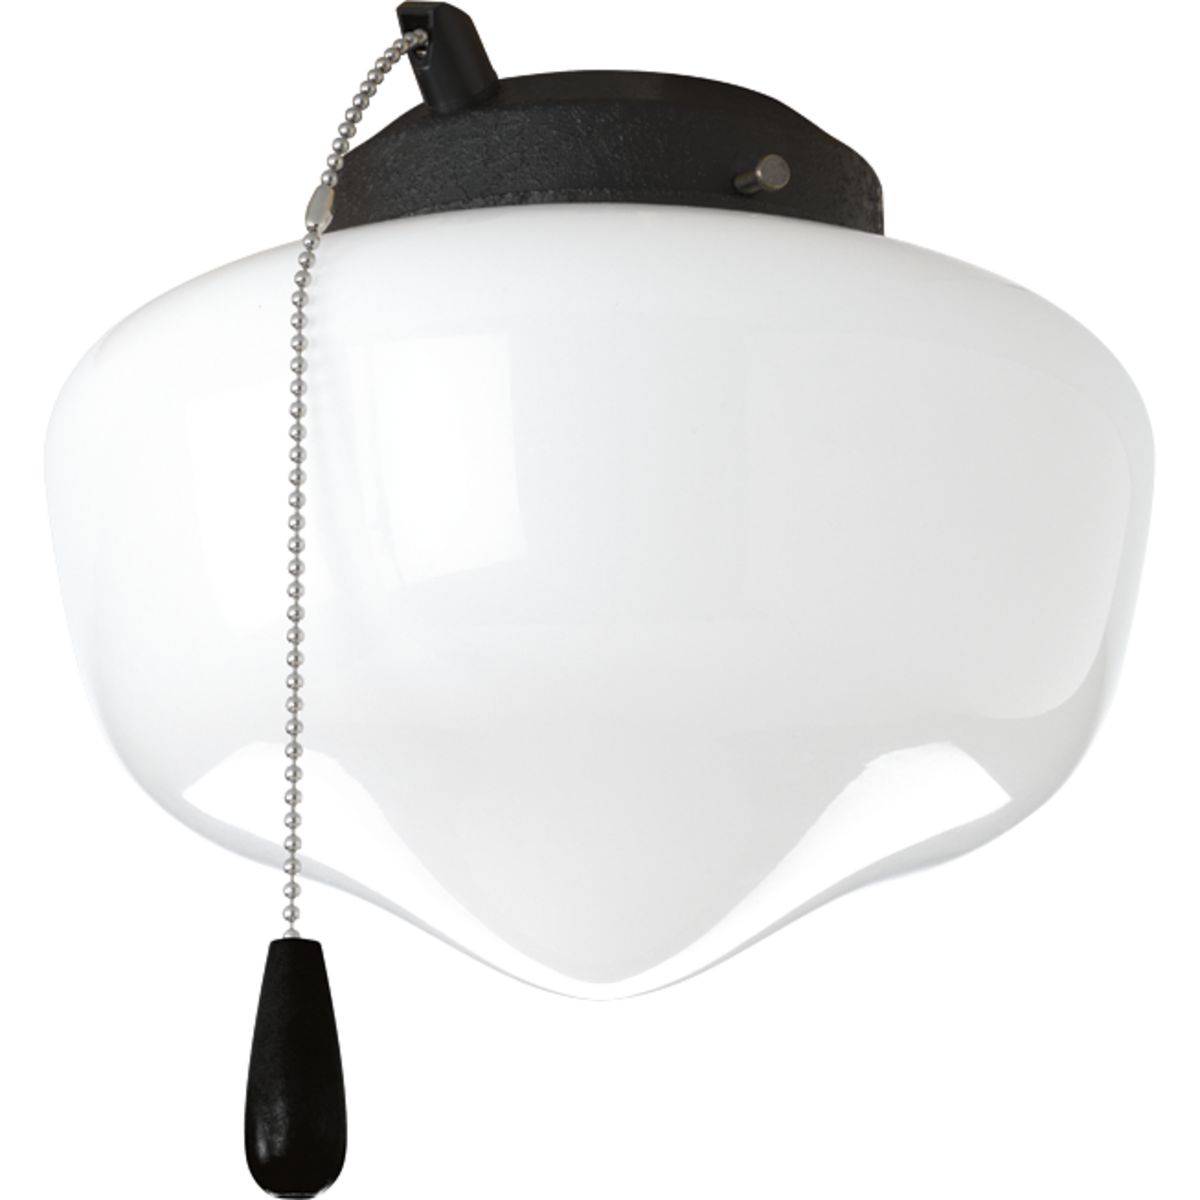 One-light Schoolhouse style ceiling fan light kit with white opal glass in a Forged Black finish. Listed for wet locations makes this ideal for any indoor/outdoor locations. Universal mount allows for installation with Progress and other fans (threaded adapter included). Quick connector for easy wiring is included. Includes one 3000K, 800 lumen each (source), Title 24 certified LED bulb.